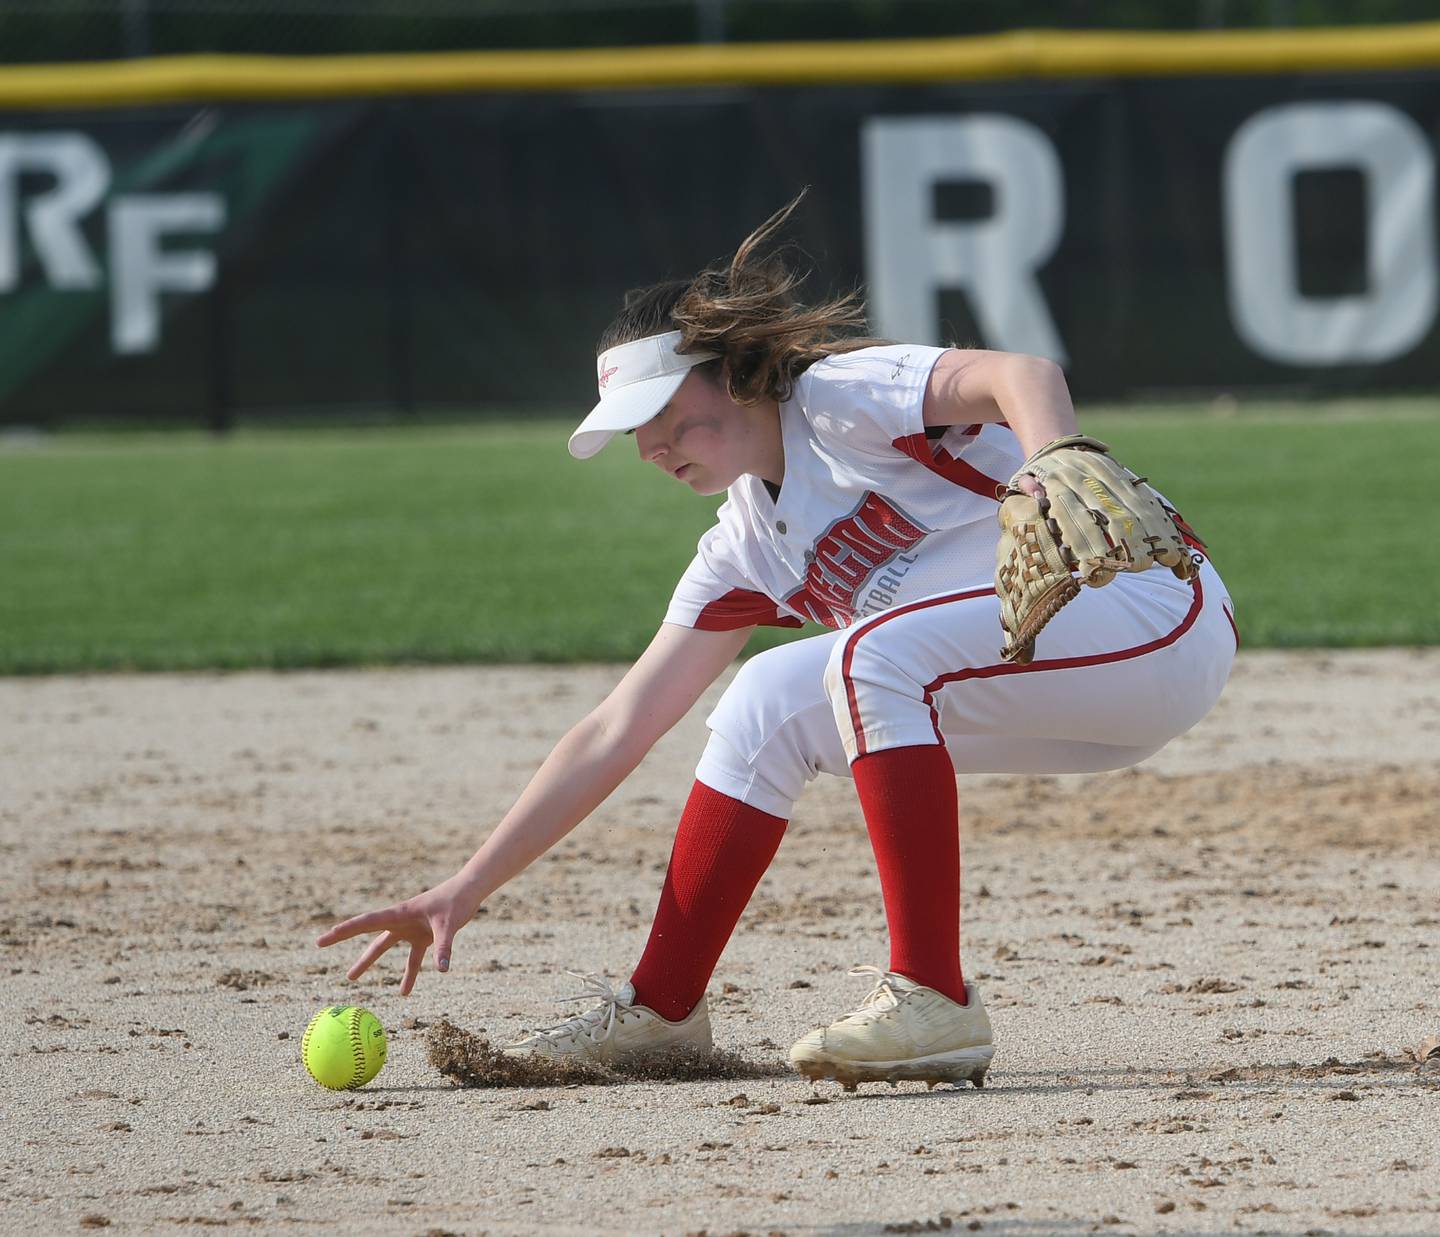 Oregon shortstop Reilee Suter reaches for the ball after it was deflected by pitcher Mia Trampel during Wednesday's regional game with Byron.